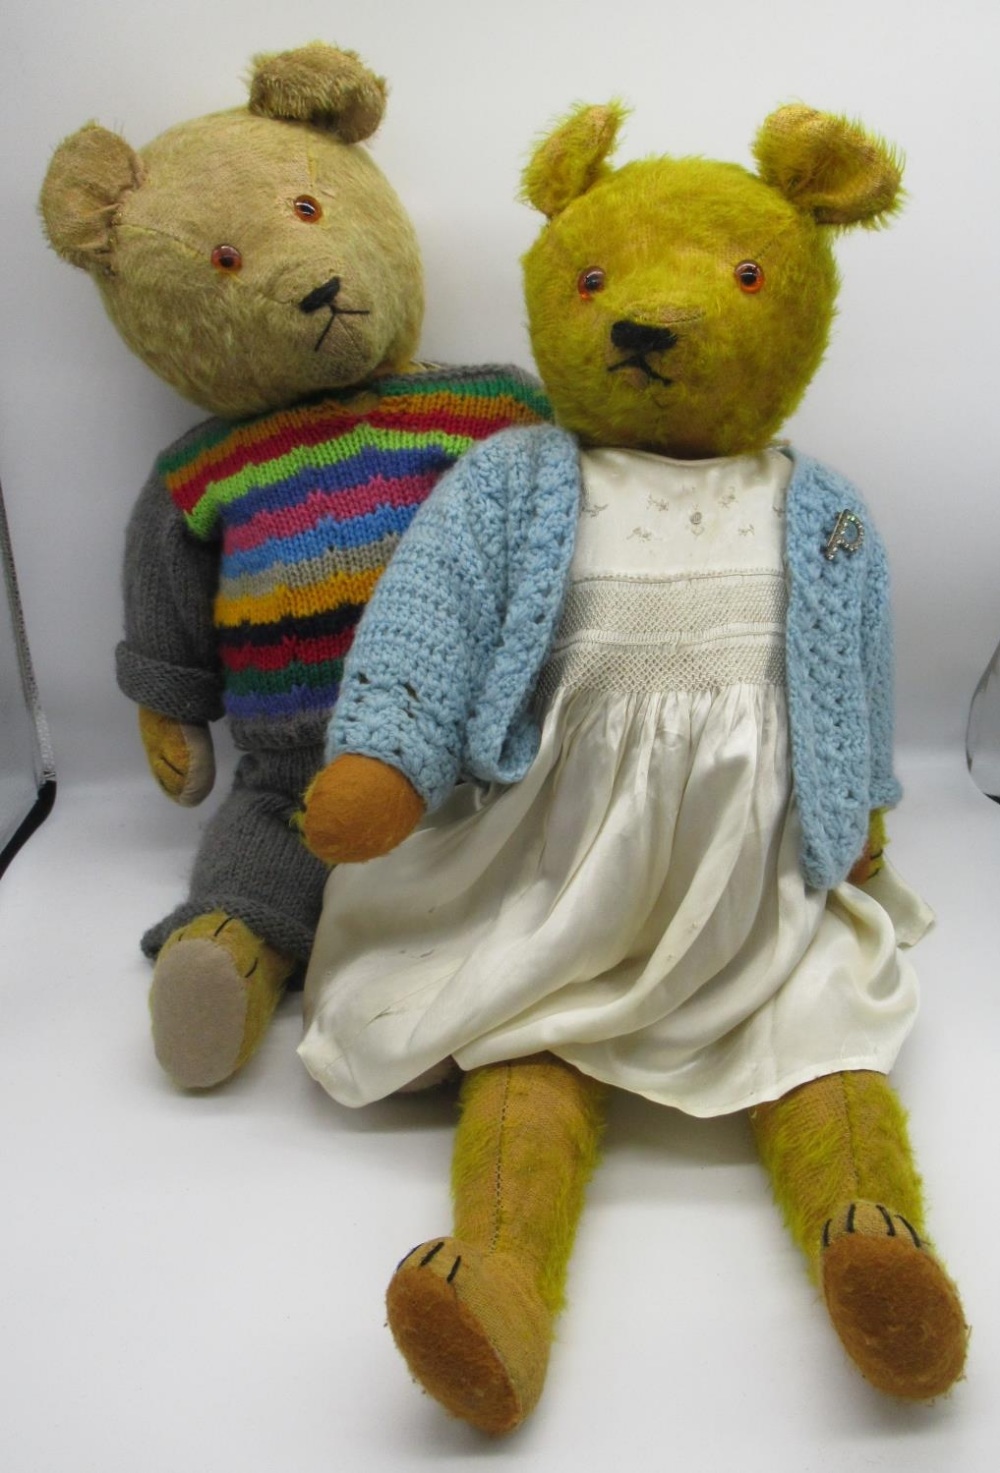 Early C20th American teddy bear in golden mohair with glass eyes jointed arms and legs, stitched